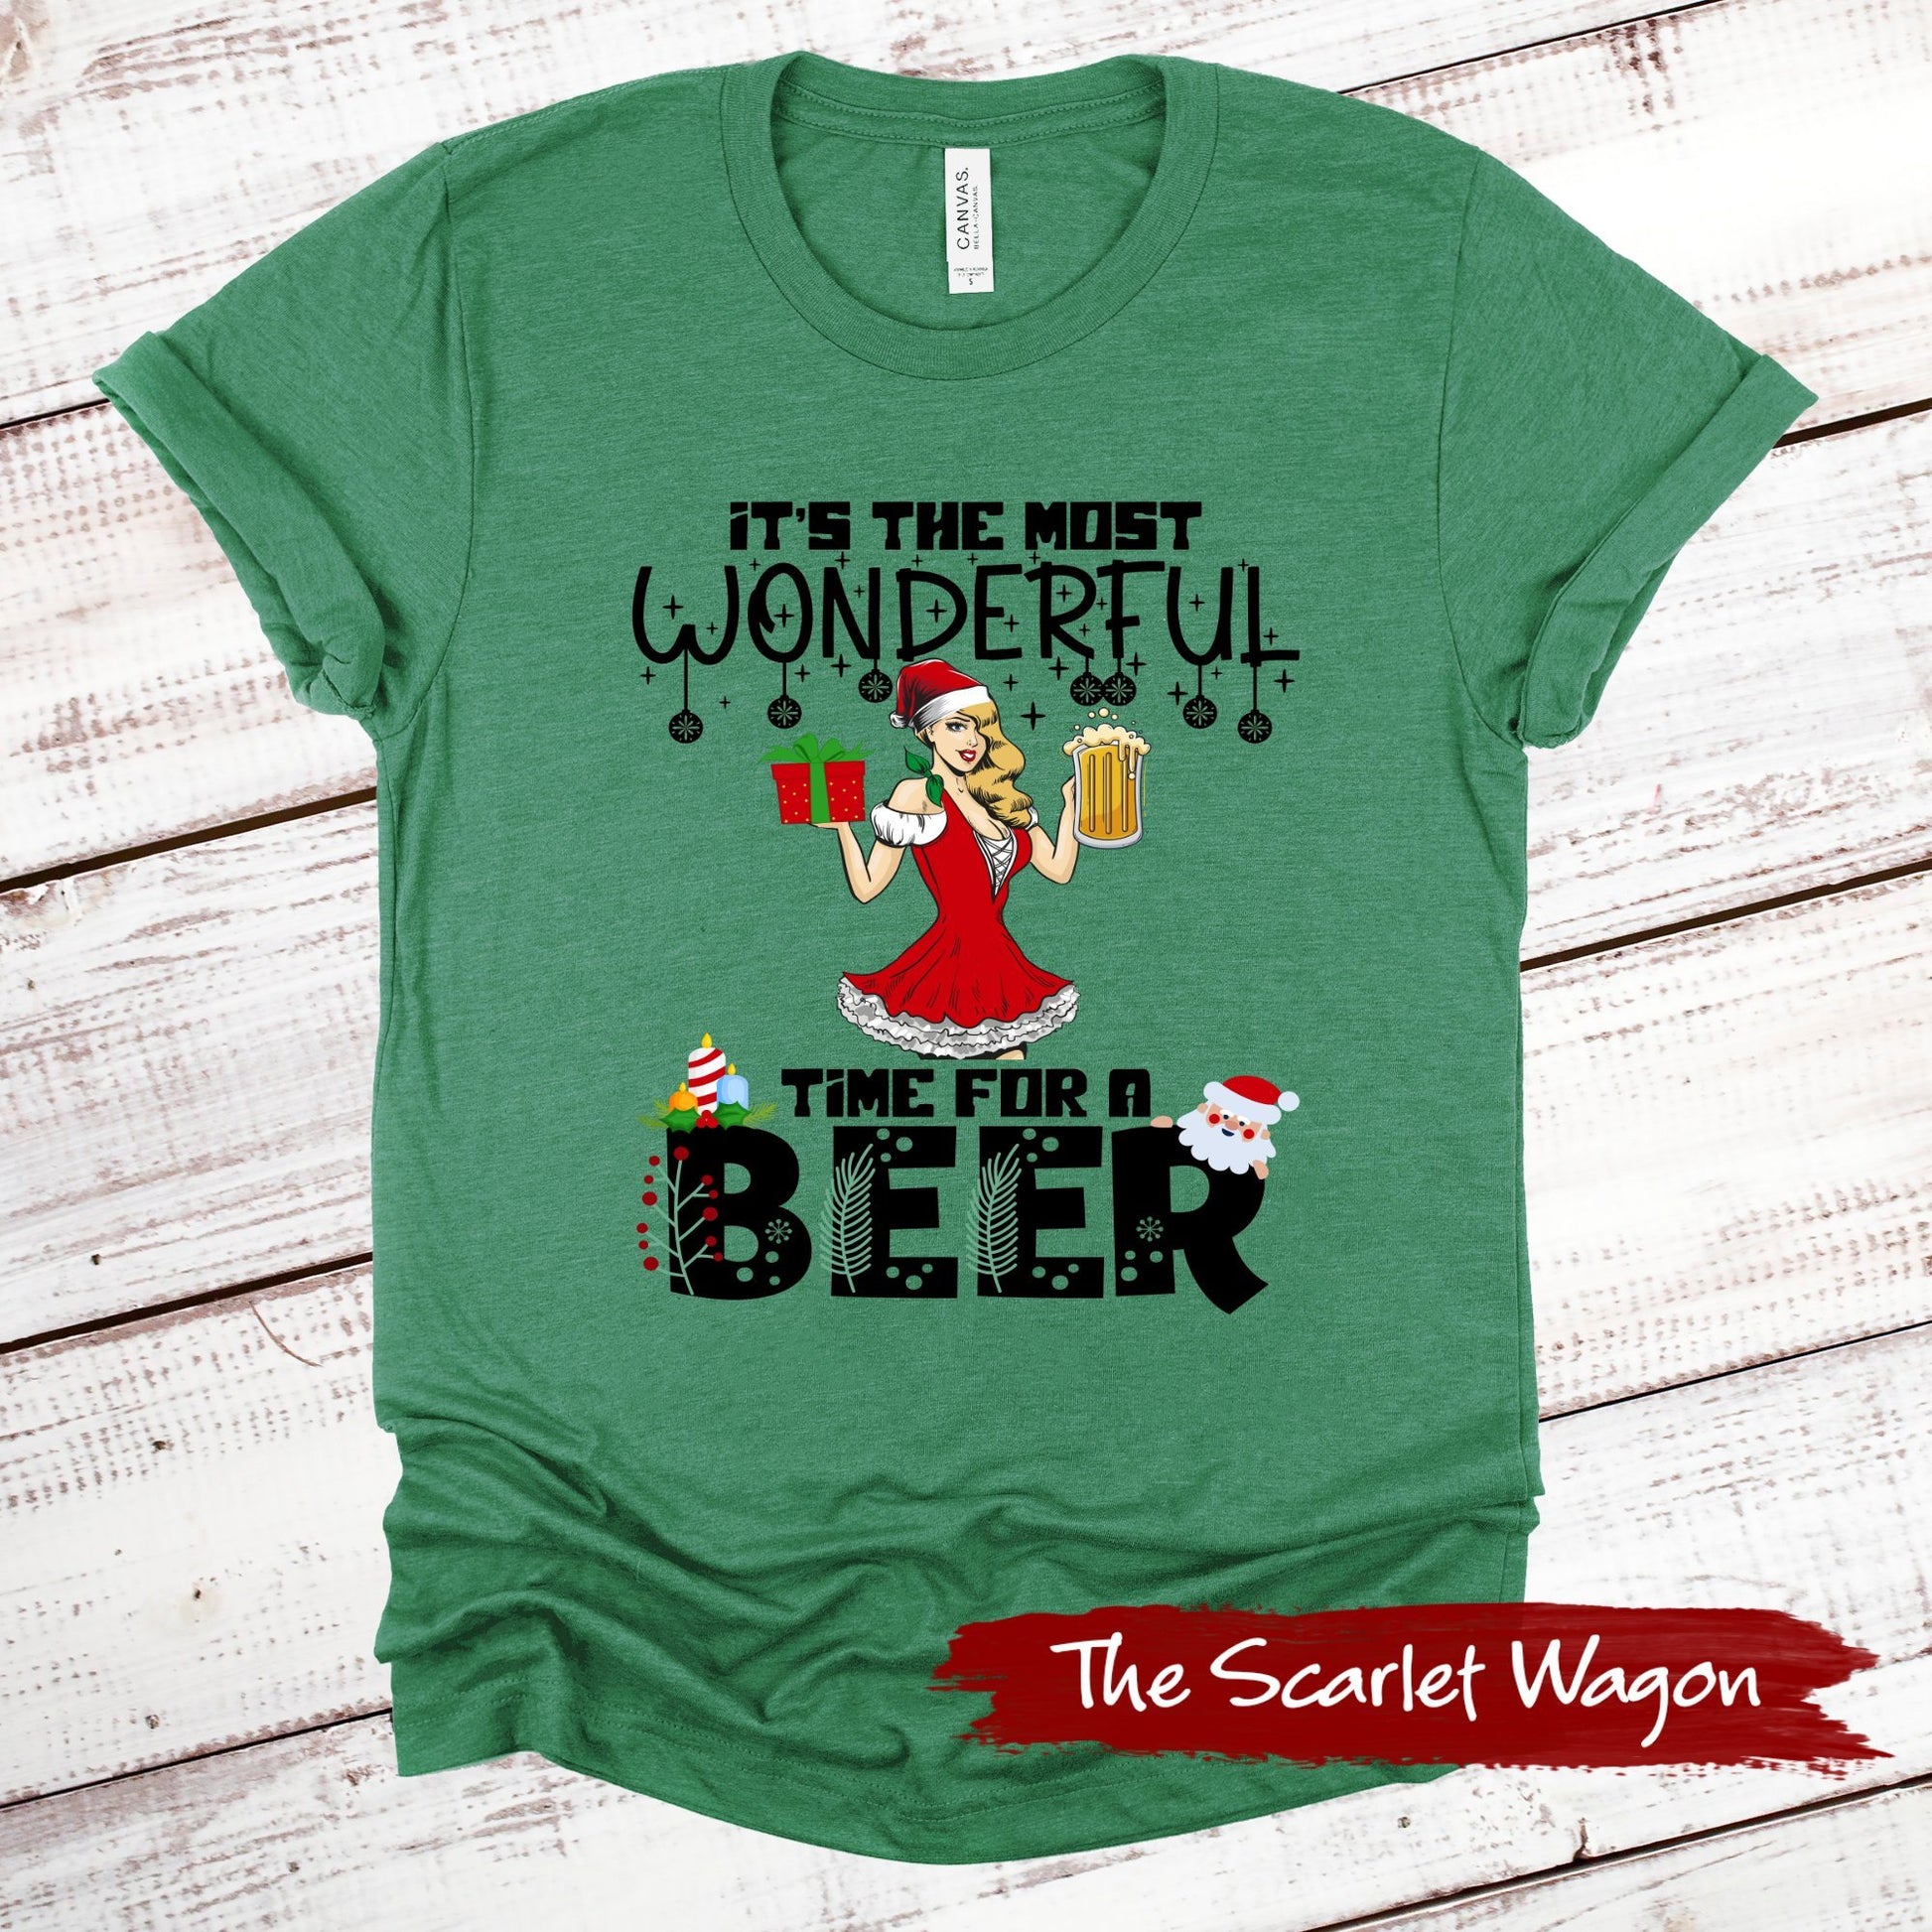 Most Wonderful Time for a Beer Christmas Shirt Scarlet Wagon Heather Green XS 